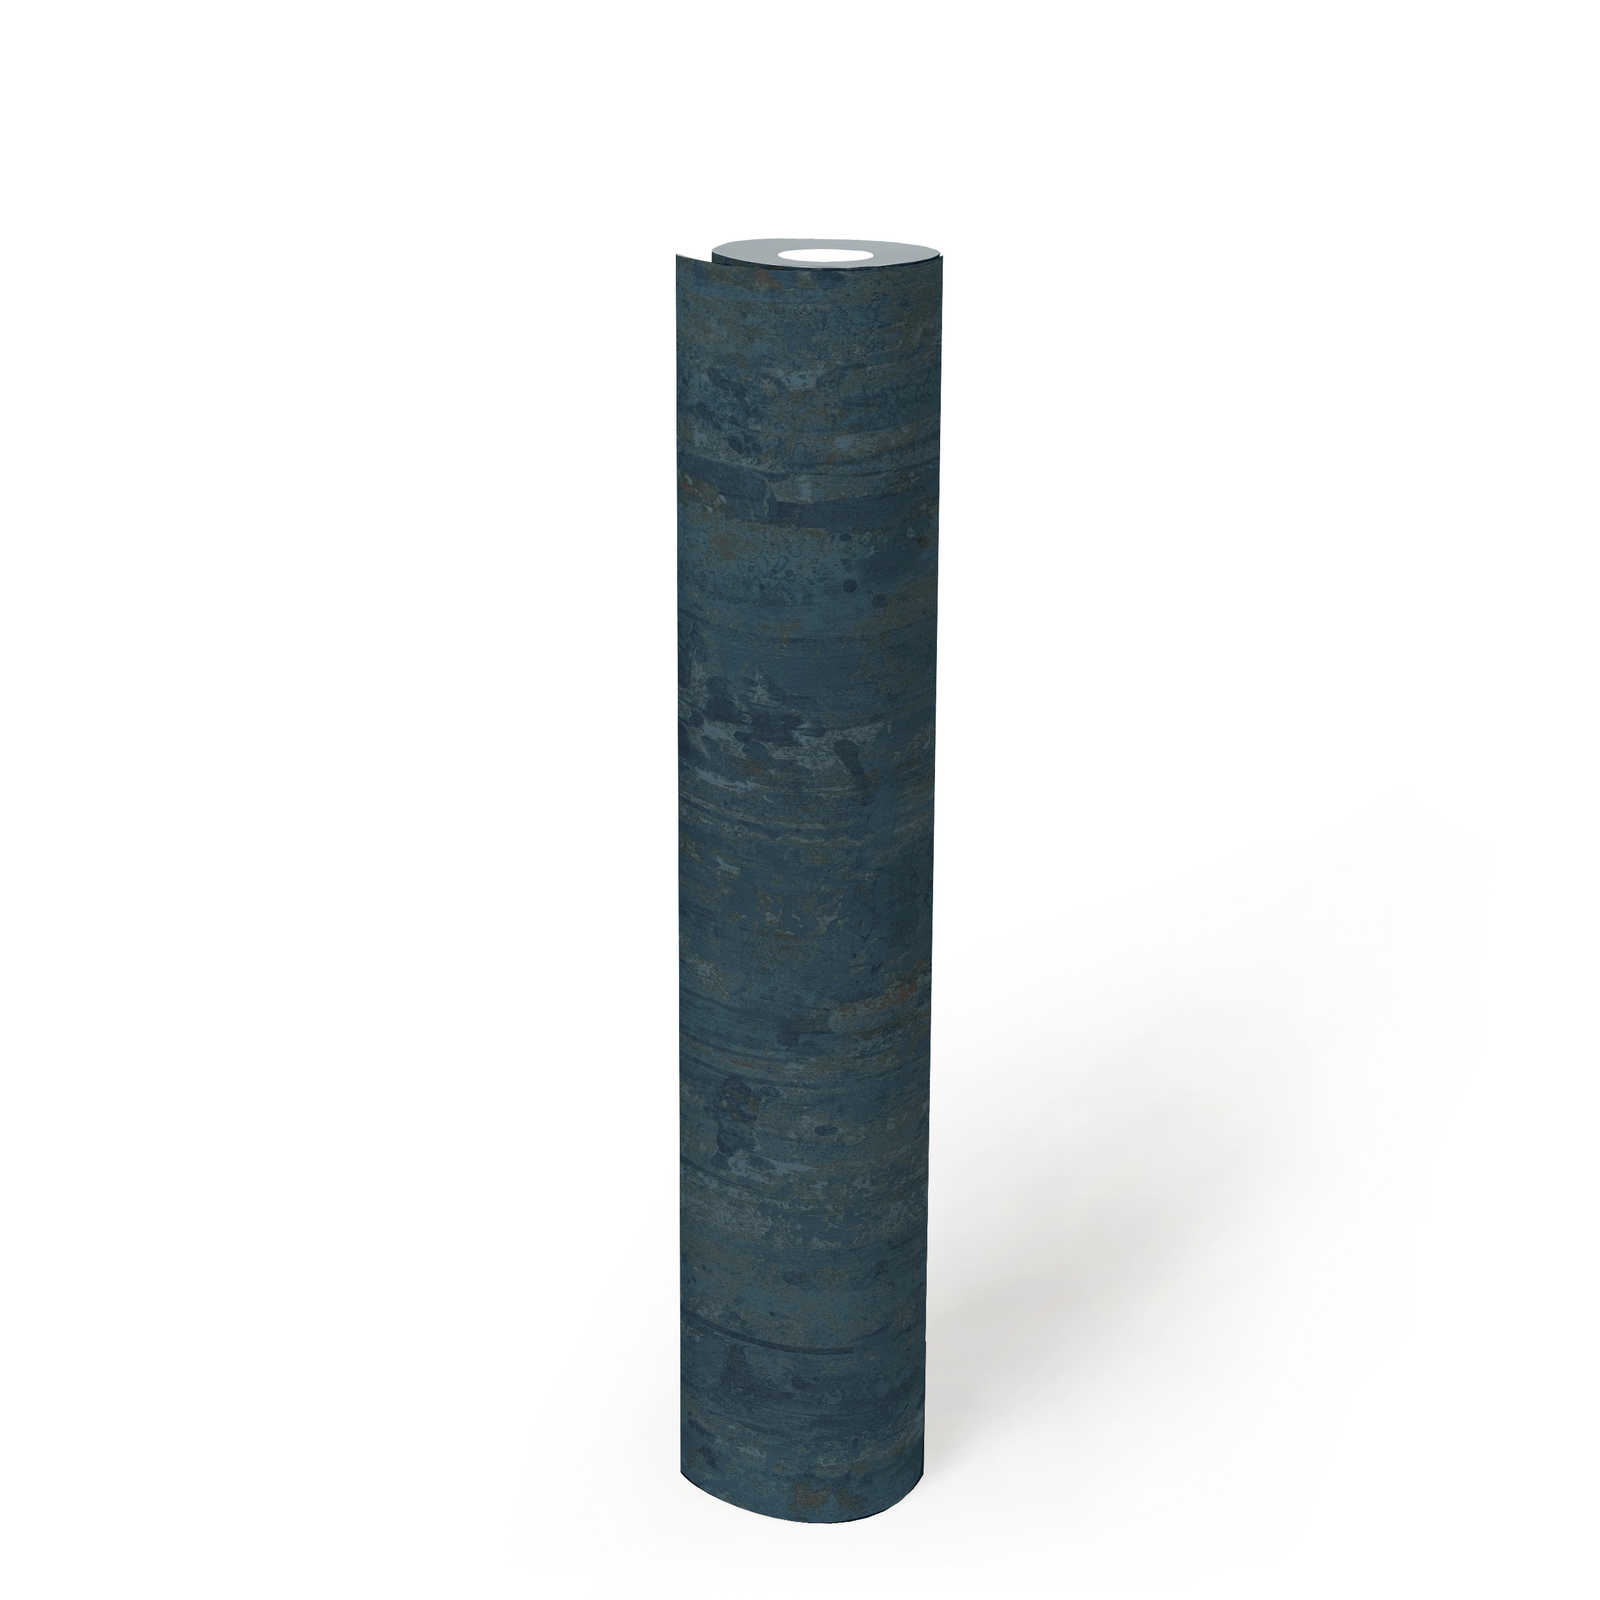             Ethno wallpaper with textured pattern in wood look - blue
        